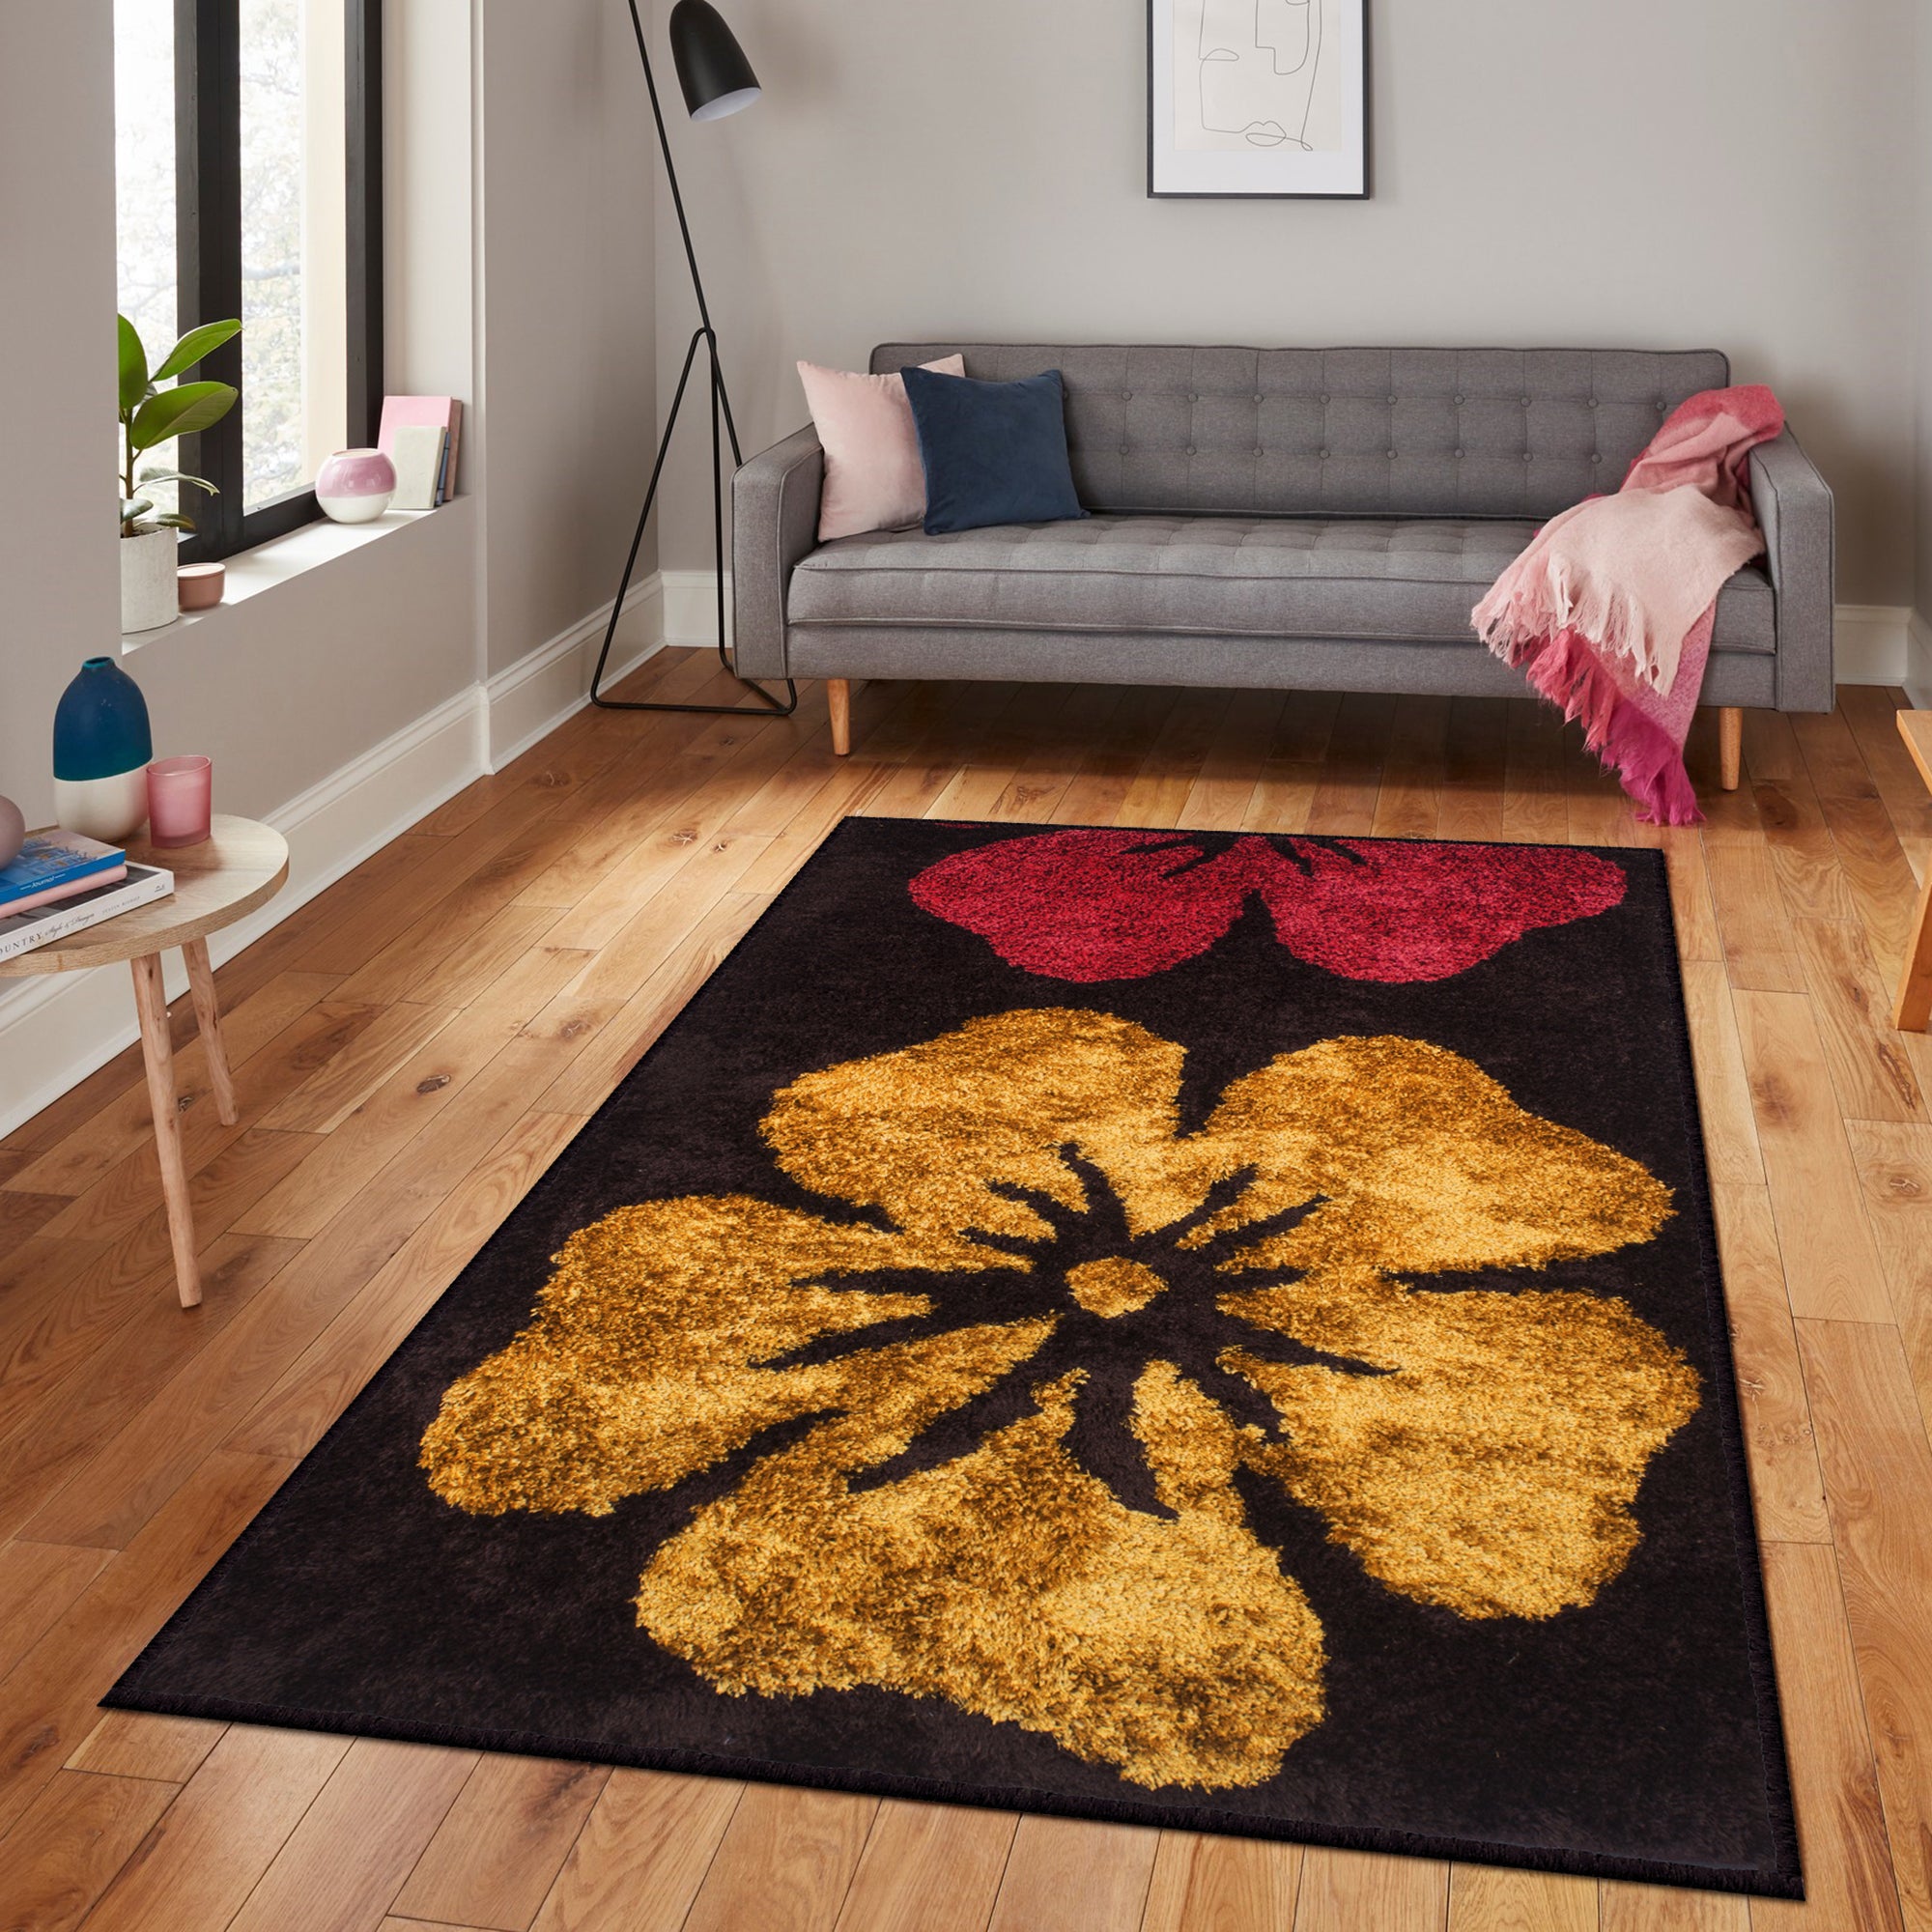 Story@Home Flower Pattern Brown & Yellow 1 PC Carpet